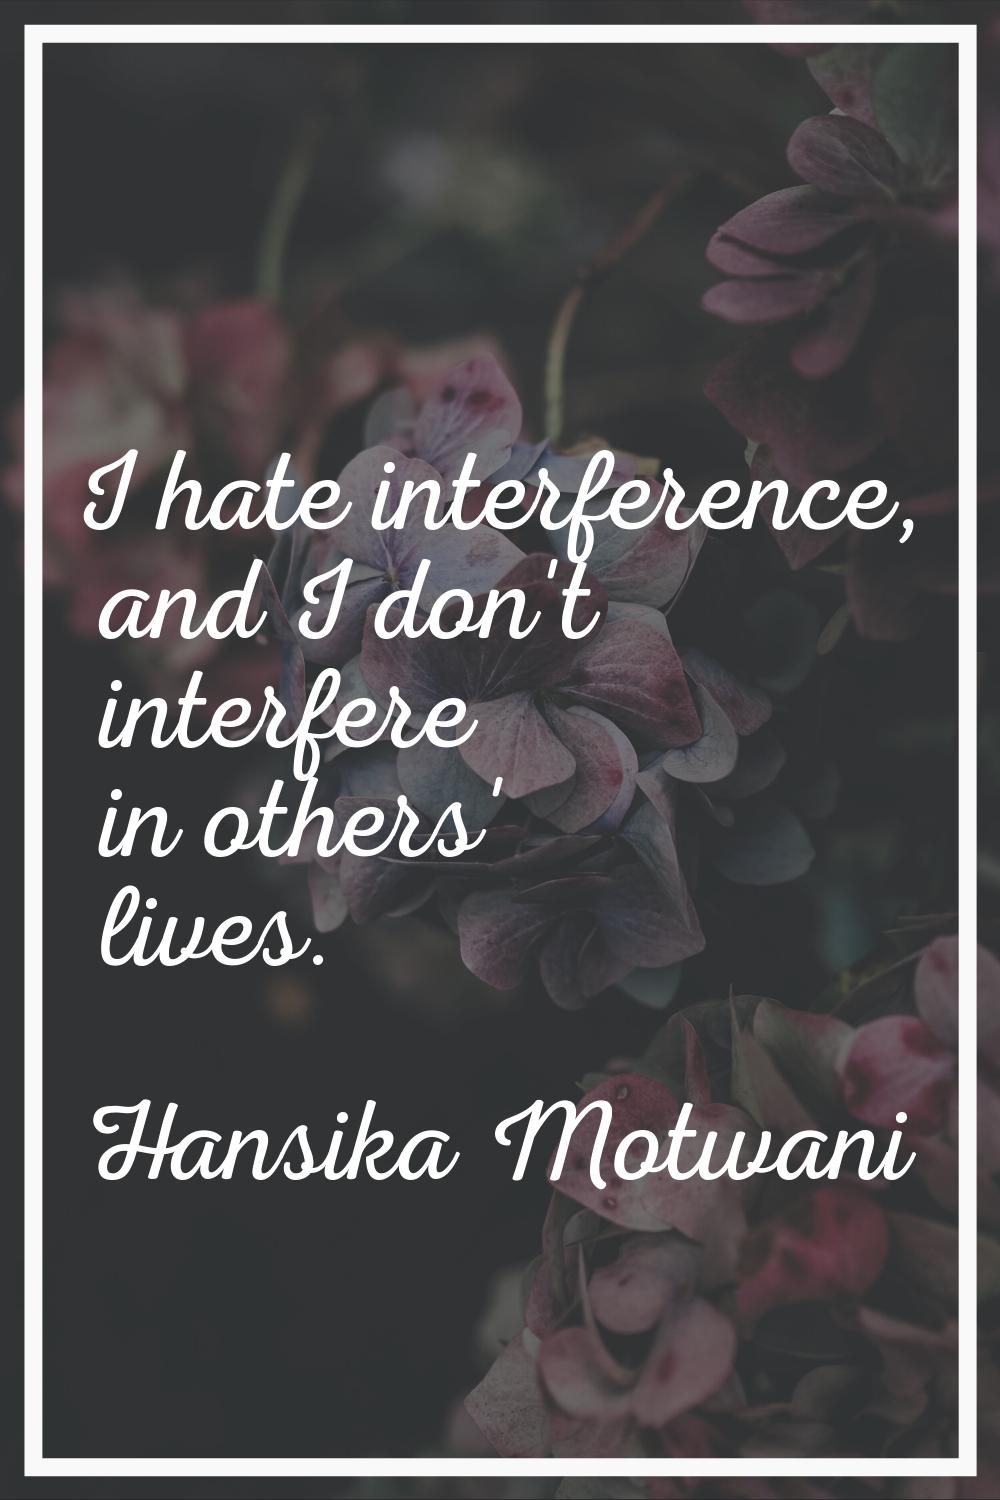 I hate interference, and I don't interfere in others' lives.